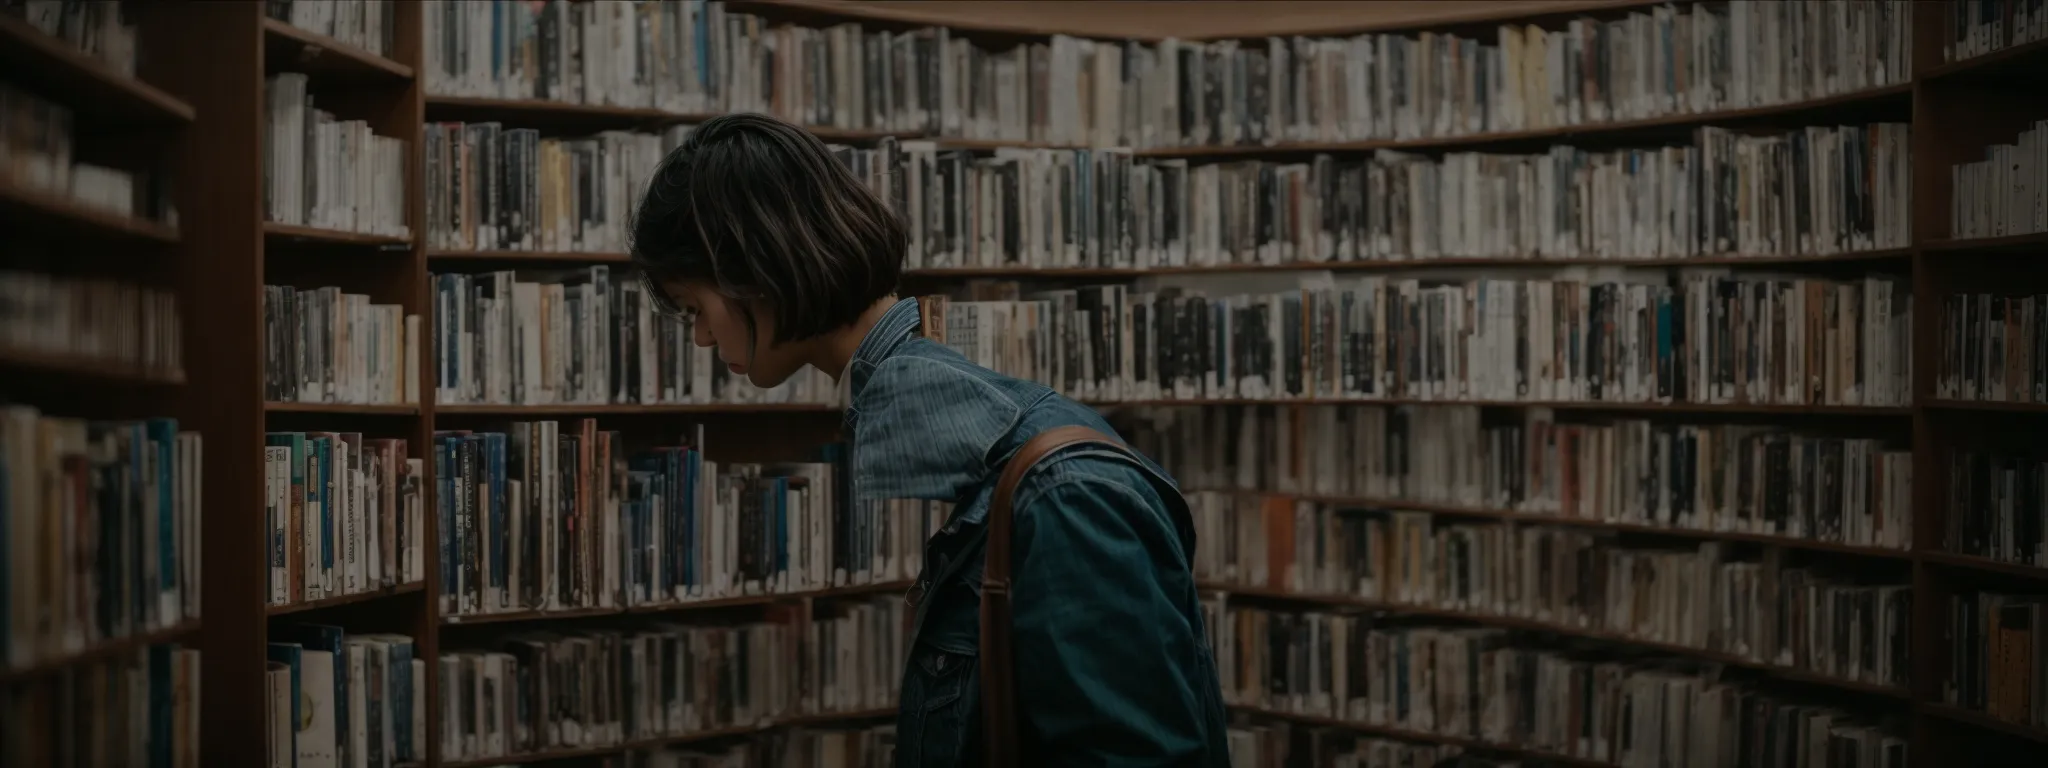 a person standing in a library, thoughtfully examining a dense cluster of floating question marks.